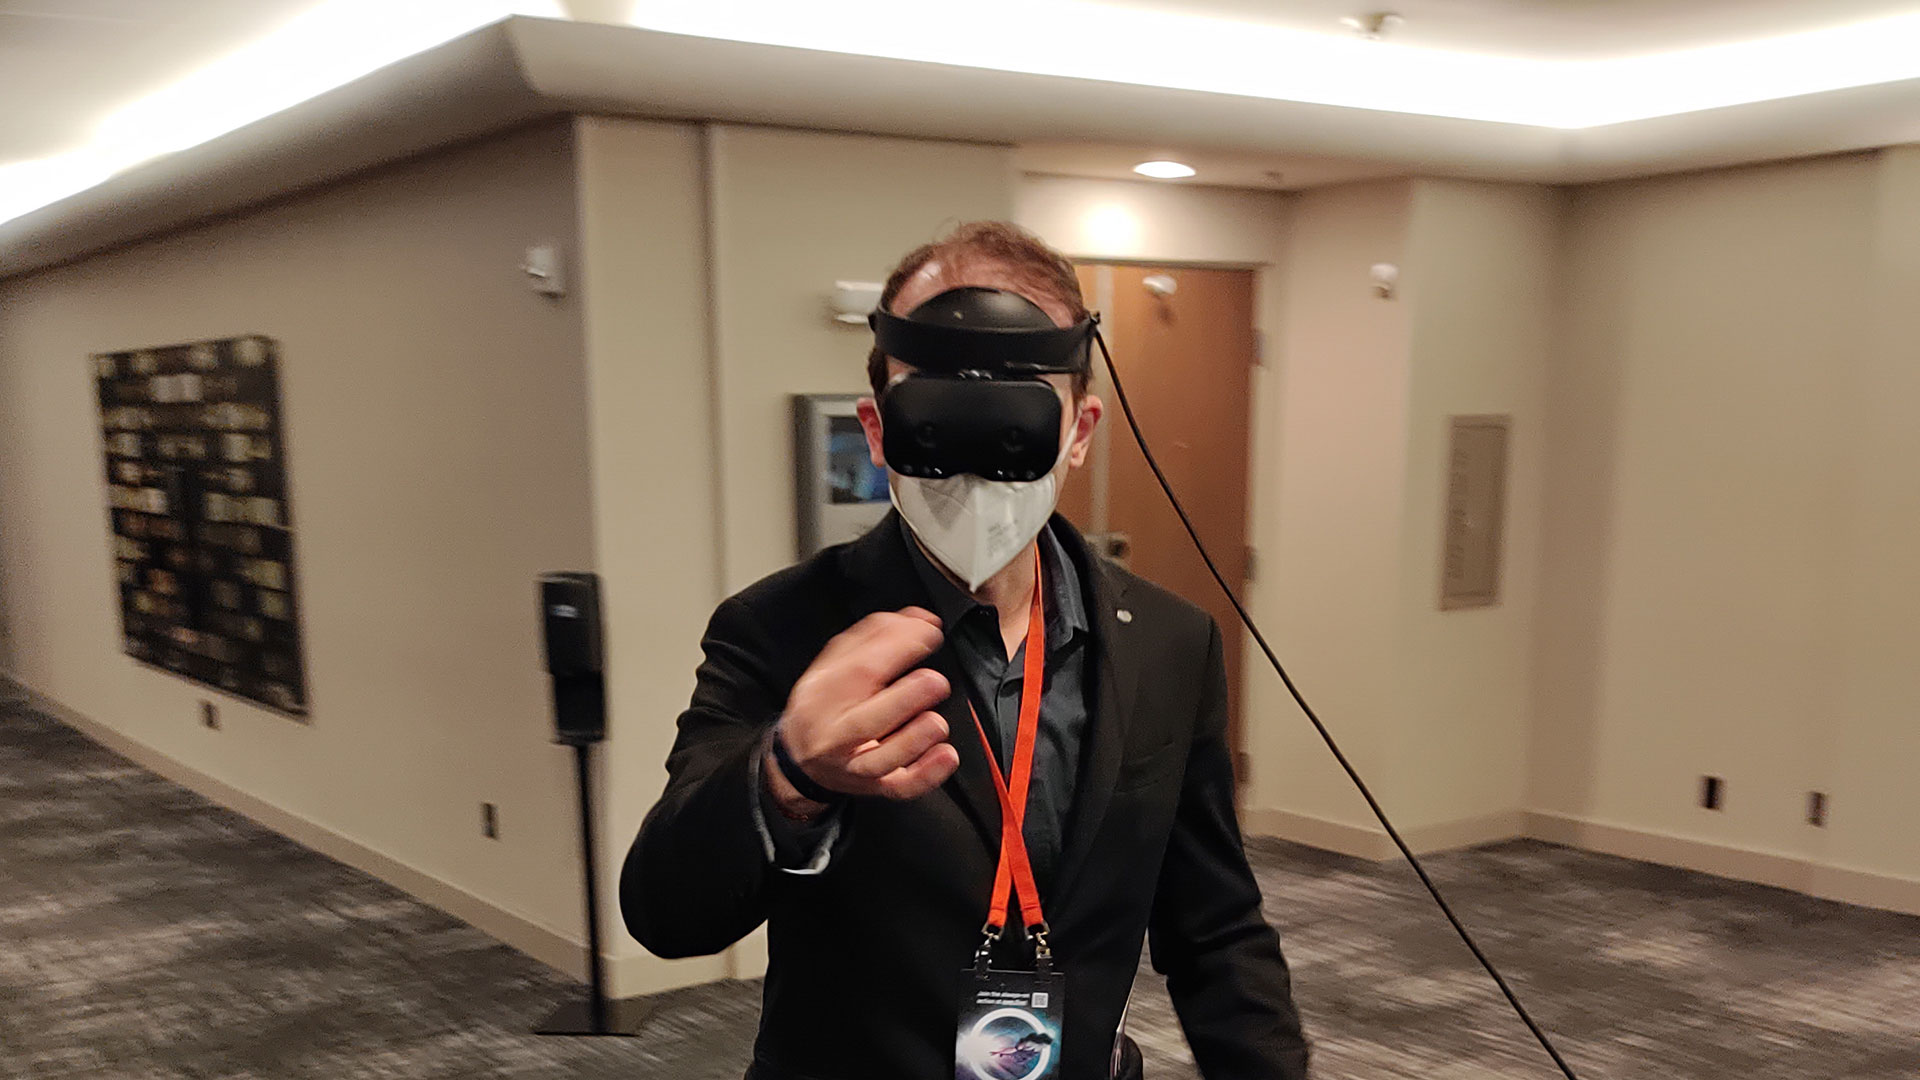 AWE 2021: Hands-on Lynx-R1 mixed reality headset